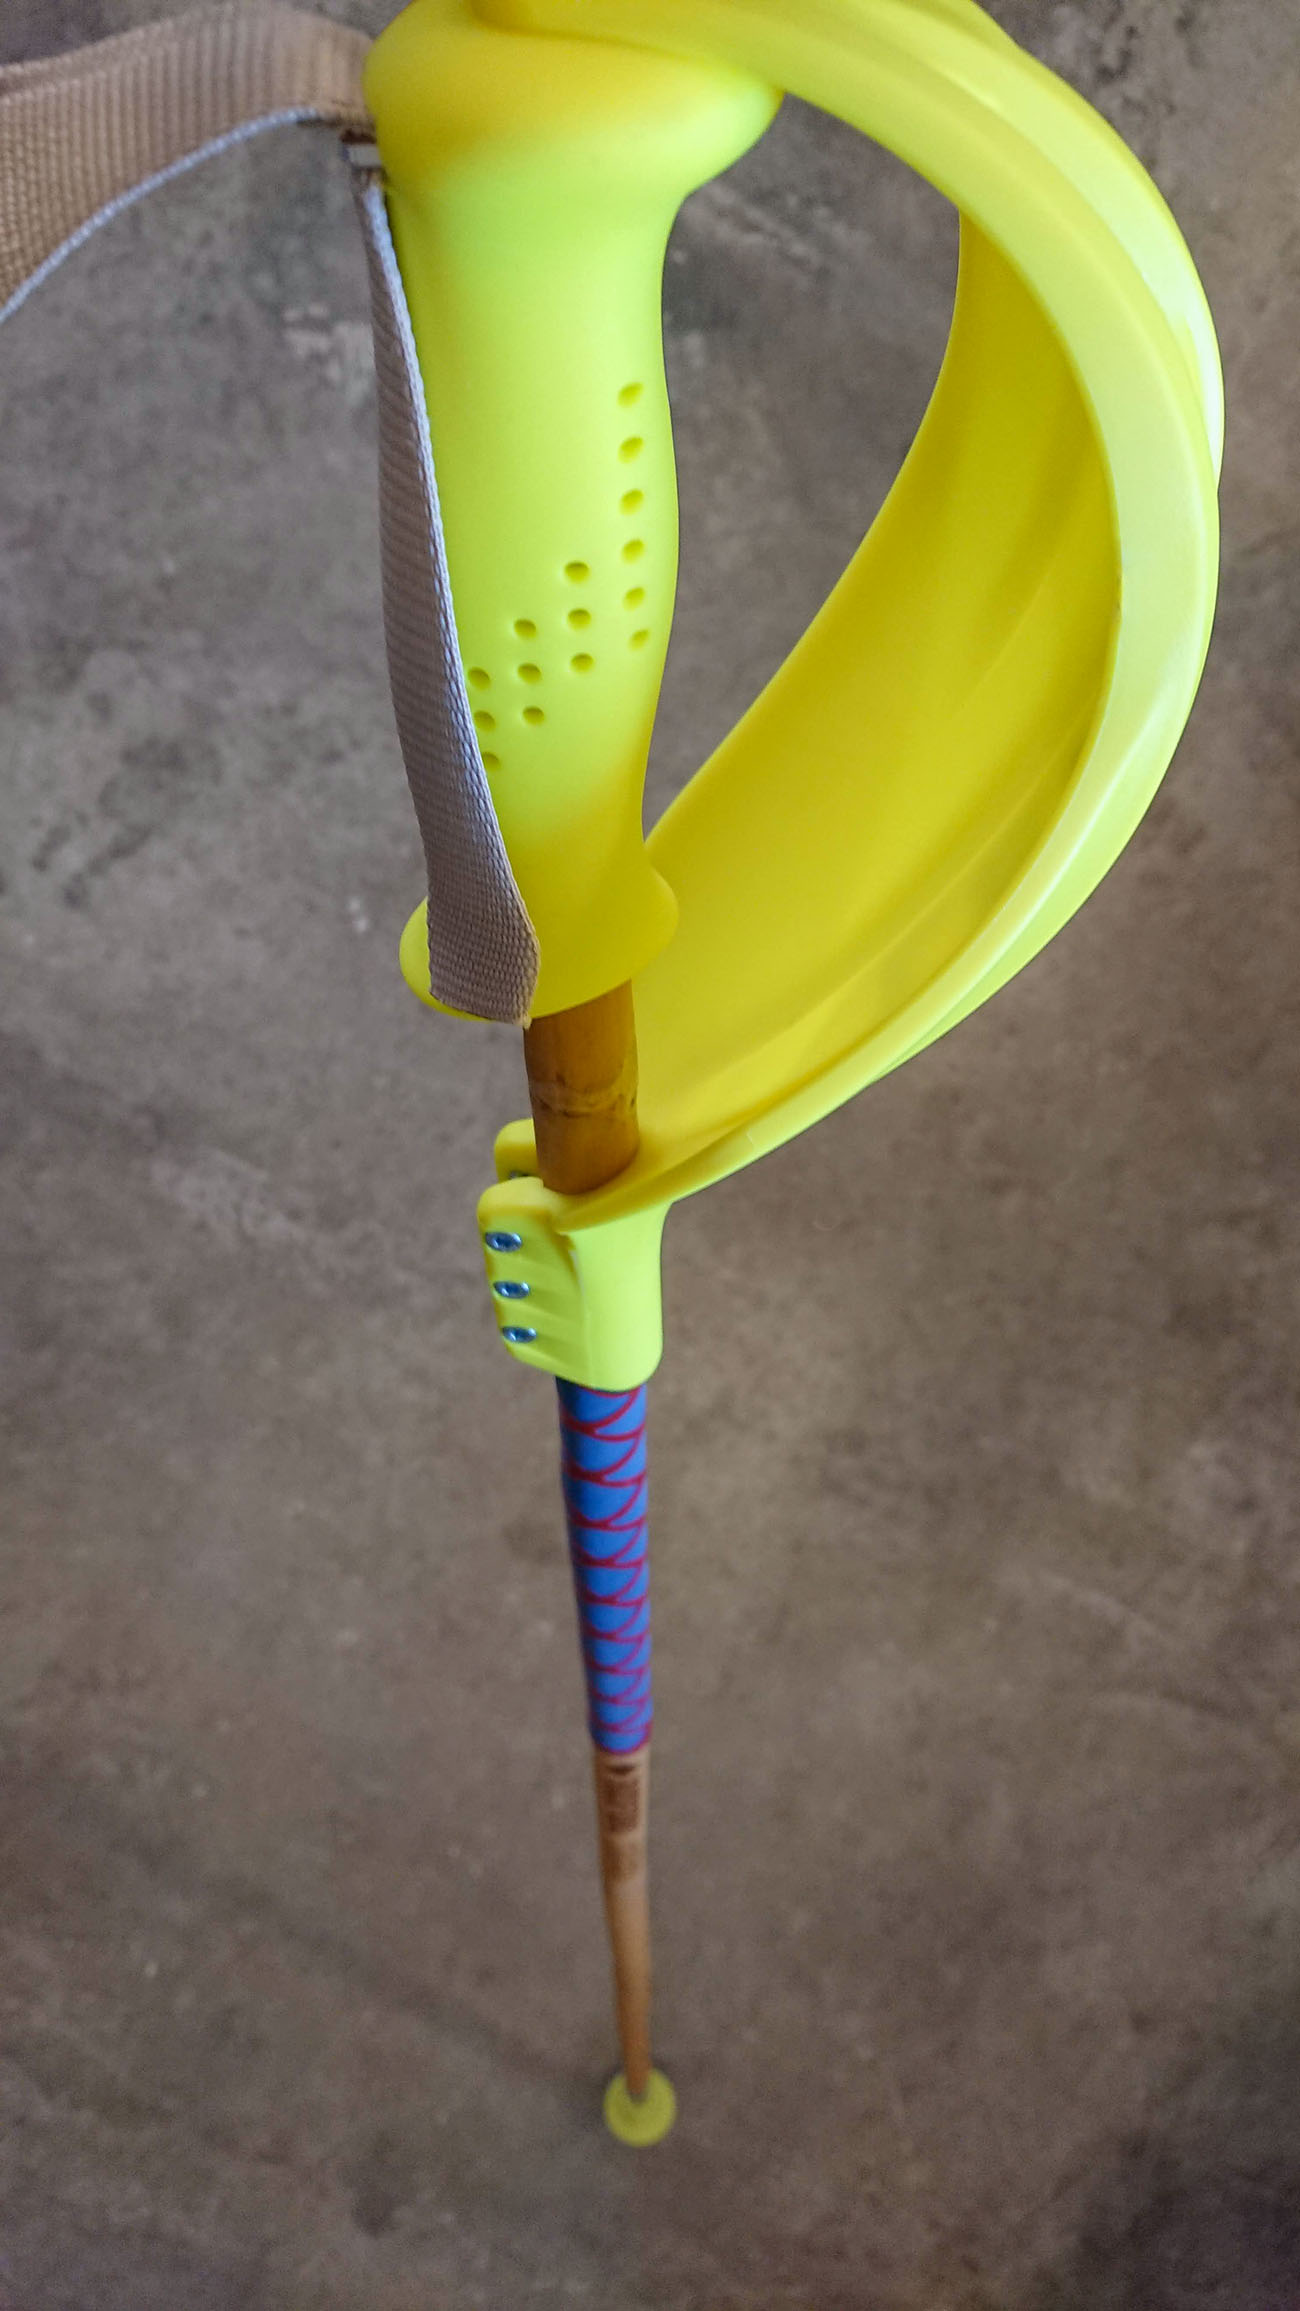 Alpine bamboo ski pole for SL racing, with fluorescent yellow grip, basket and punch guard for slalom.